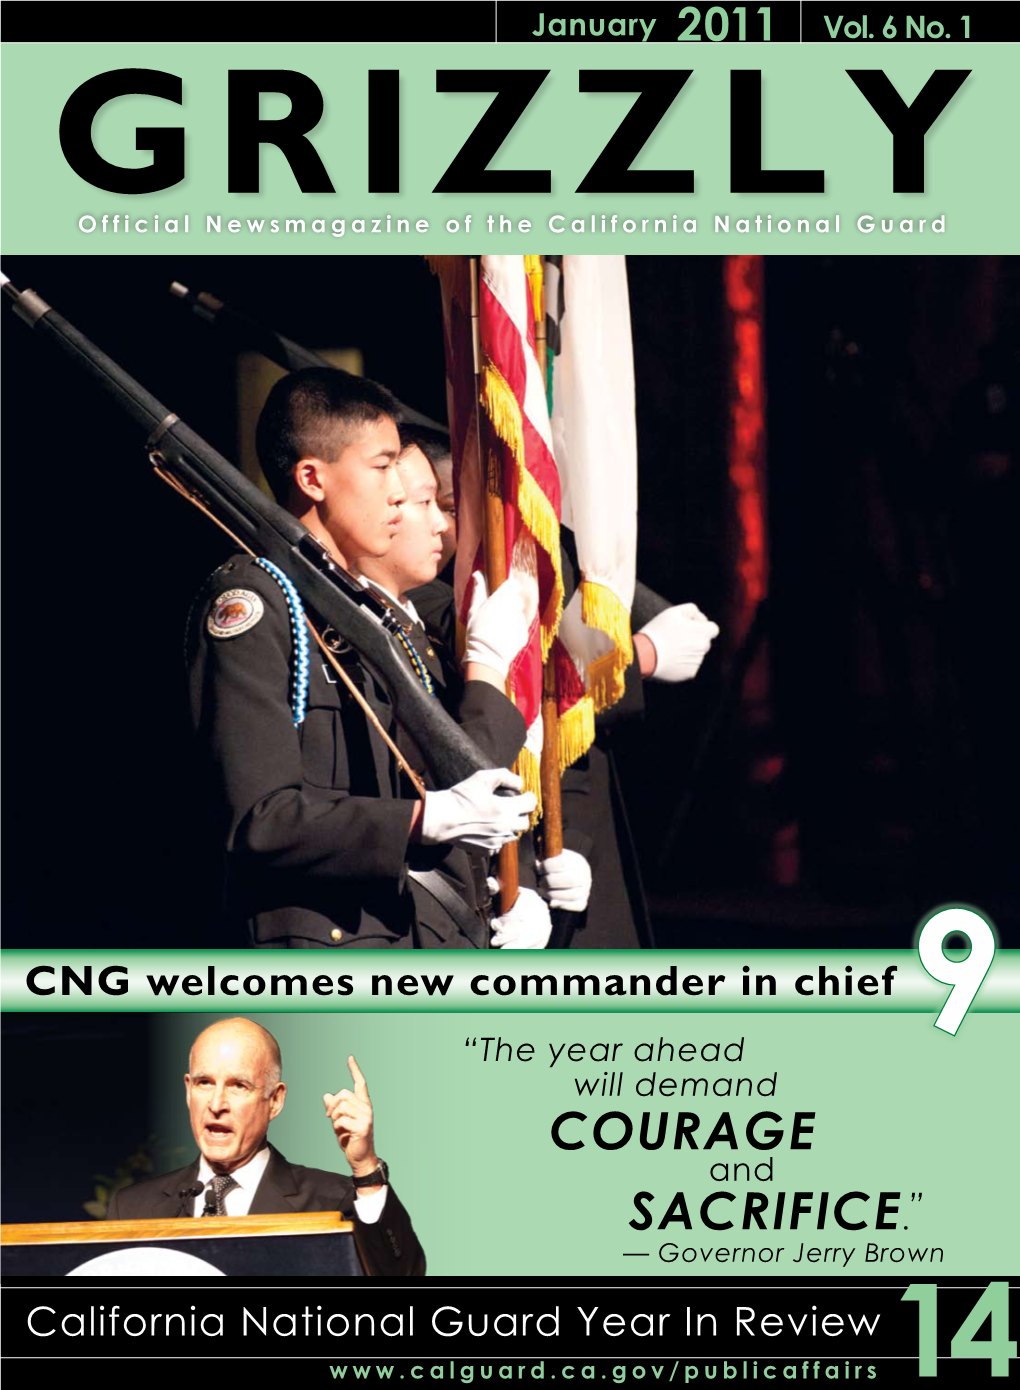 Official Newsmagazine of the California National Guard